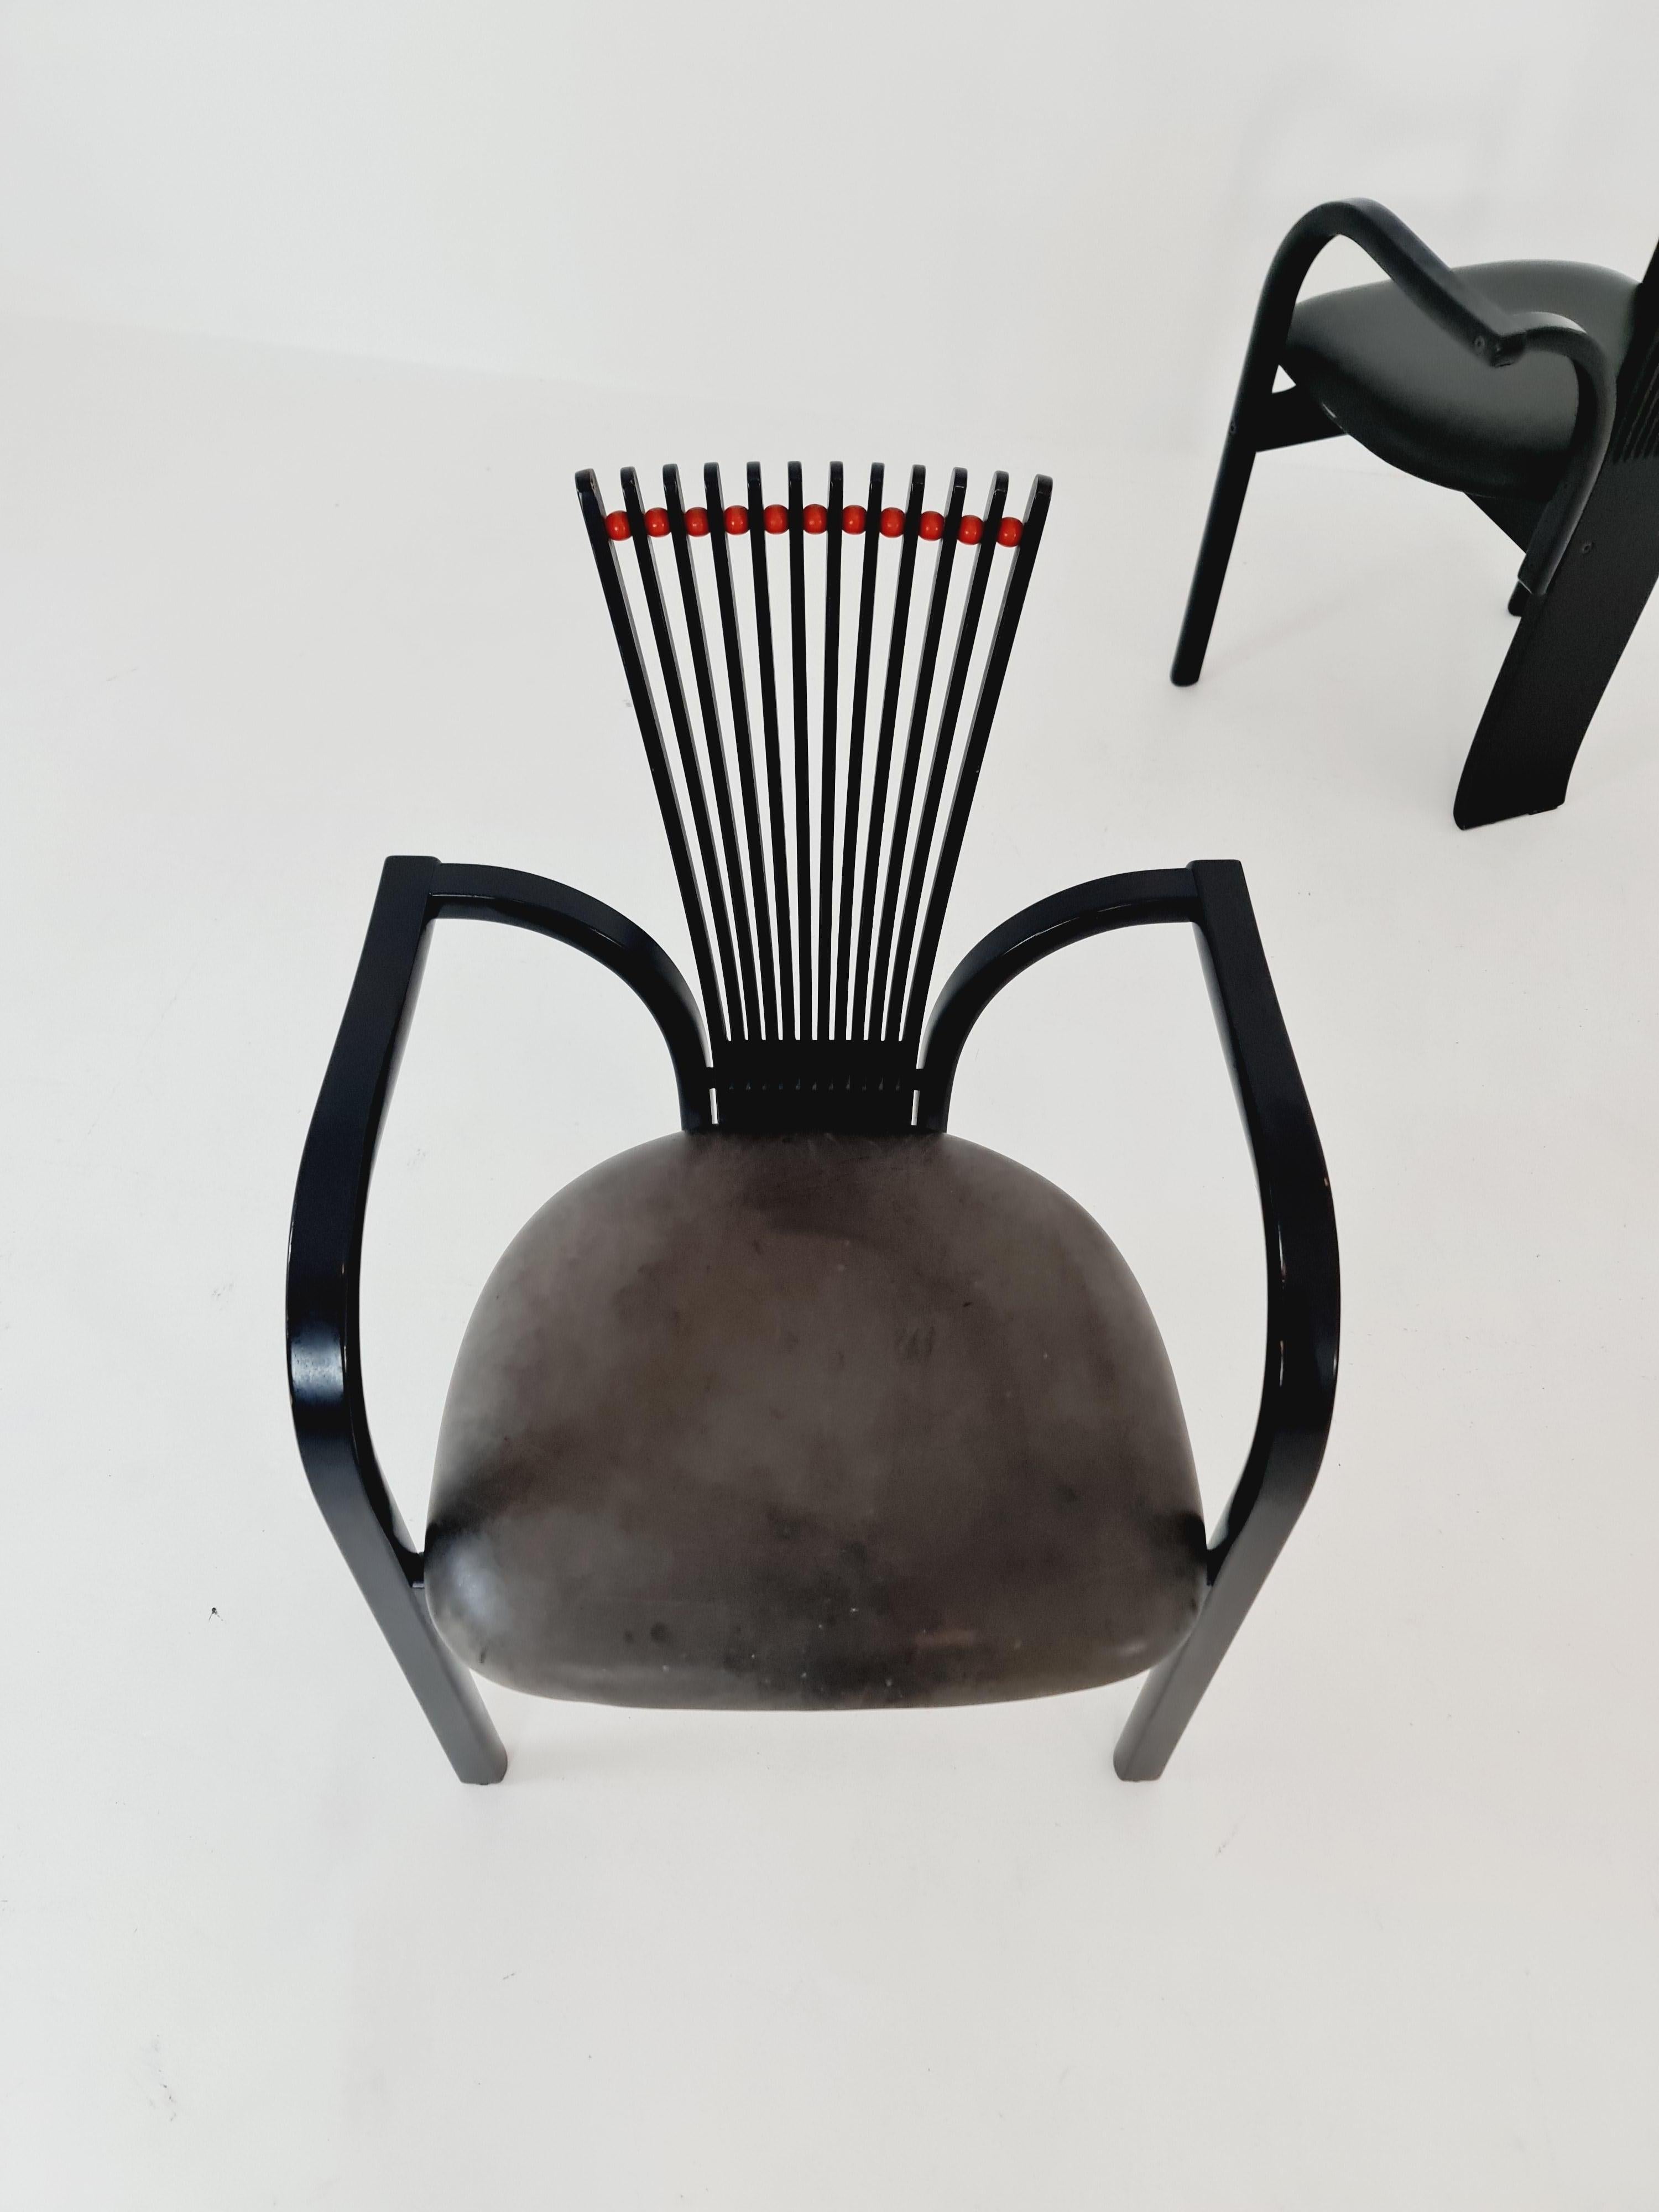 4 Totem dining chairs by Torstein Nilsen for Westnofa, Italian design table For Sale 8